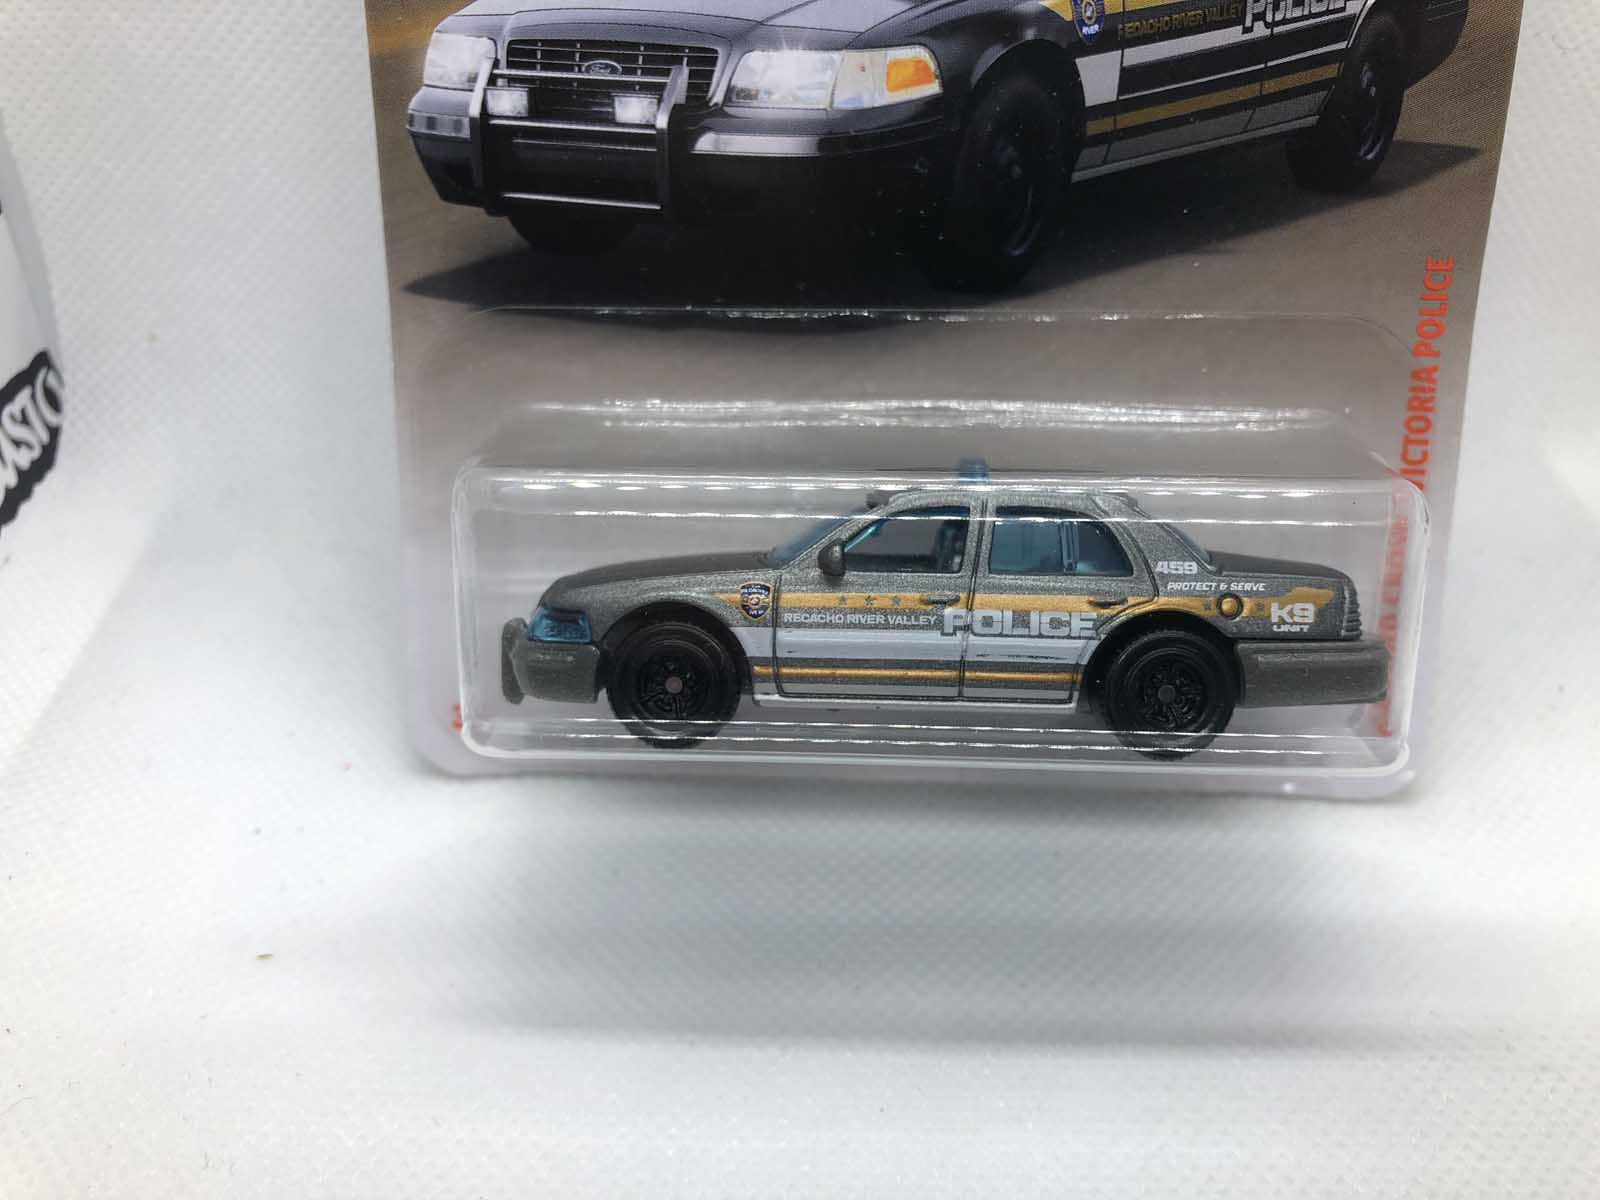 '06 Ford Crown Victoria Police Hot Wheels